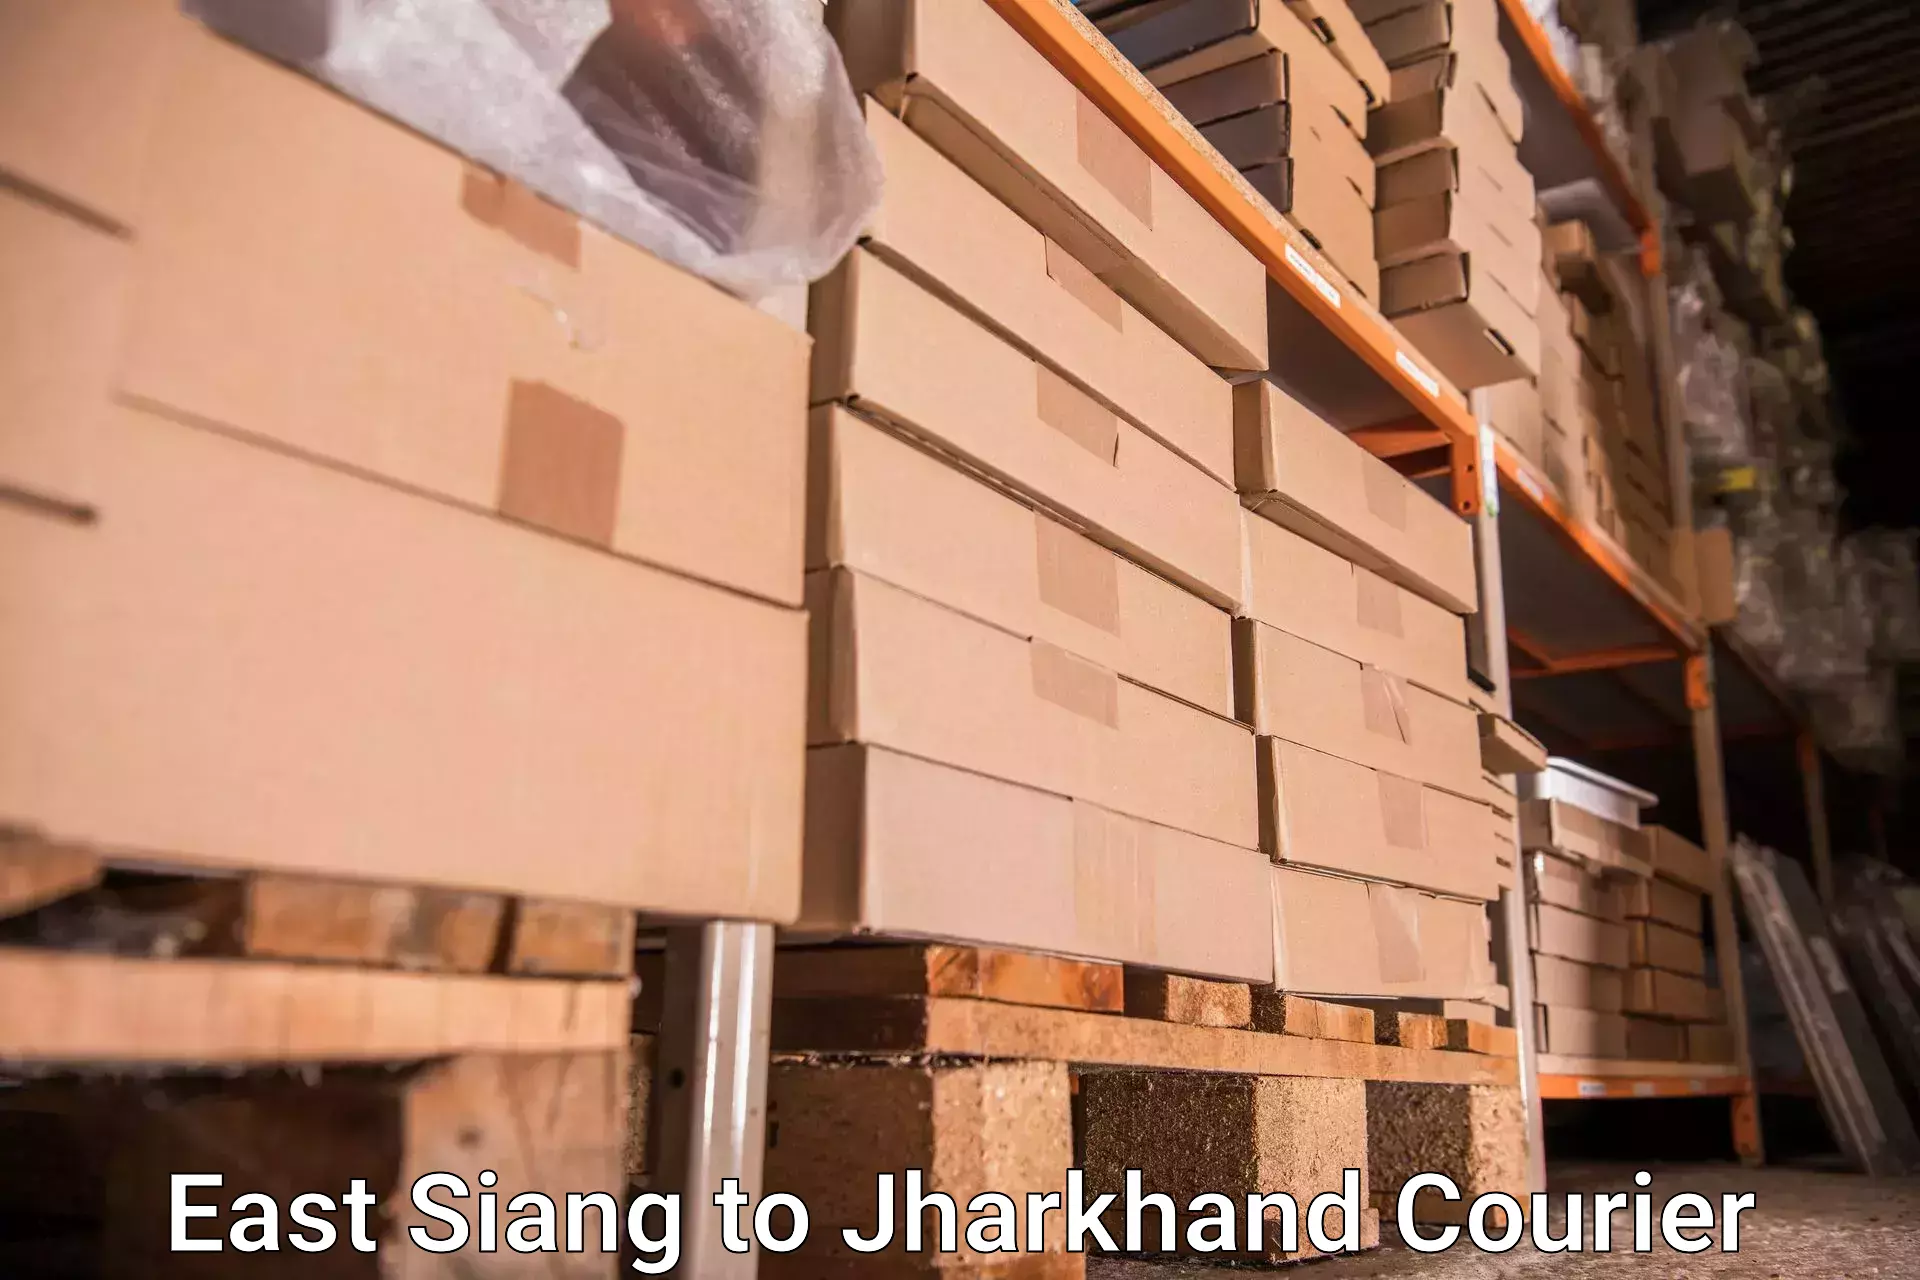 Baggage transport logistics in East Siang to Simdega